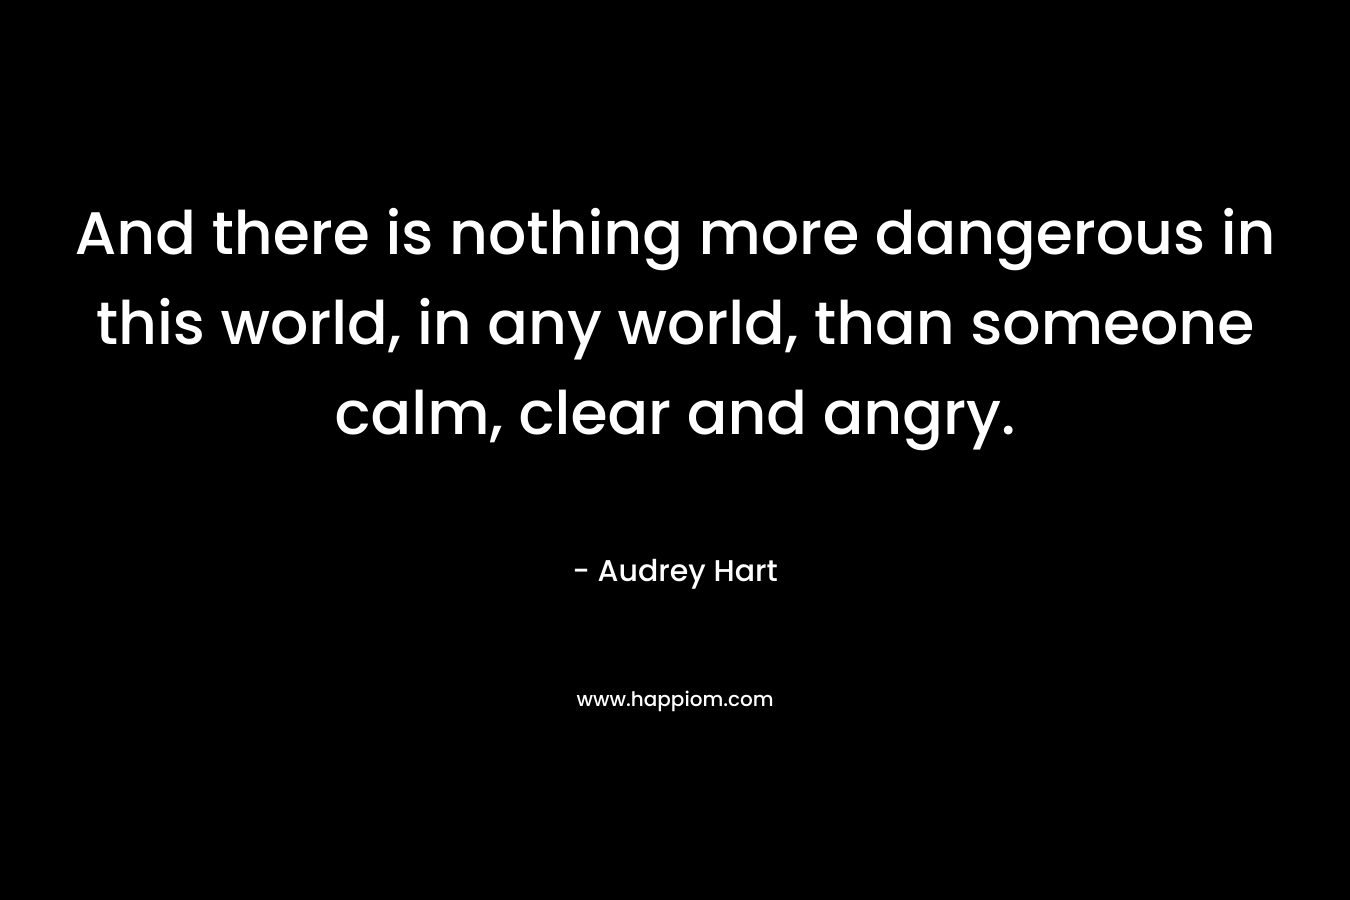 And there is nothing more dangerous in this world, in any world, than someone calm, clear and angry.